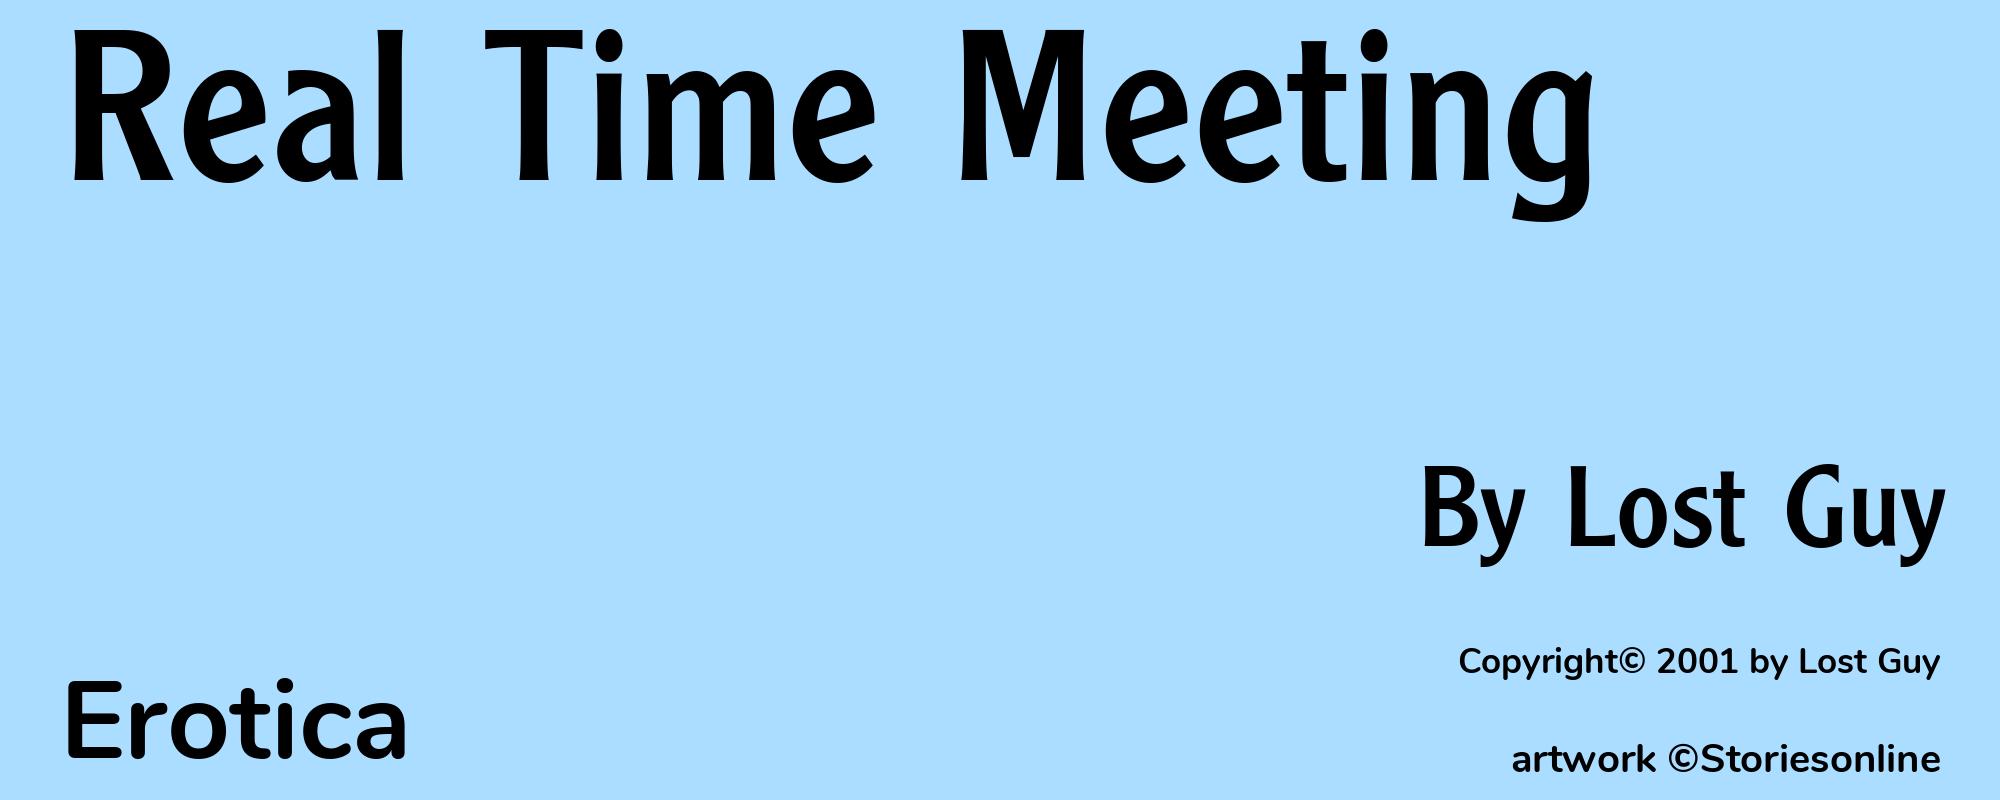 Real Time Meeting - Cover